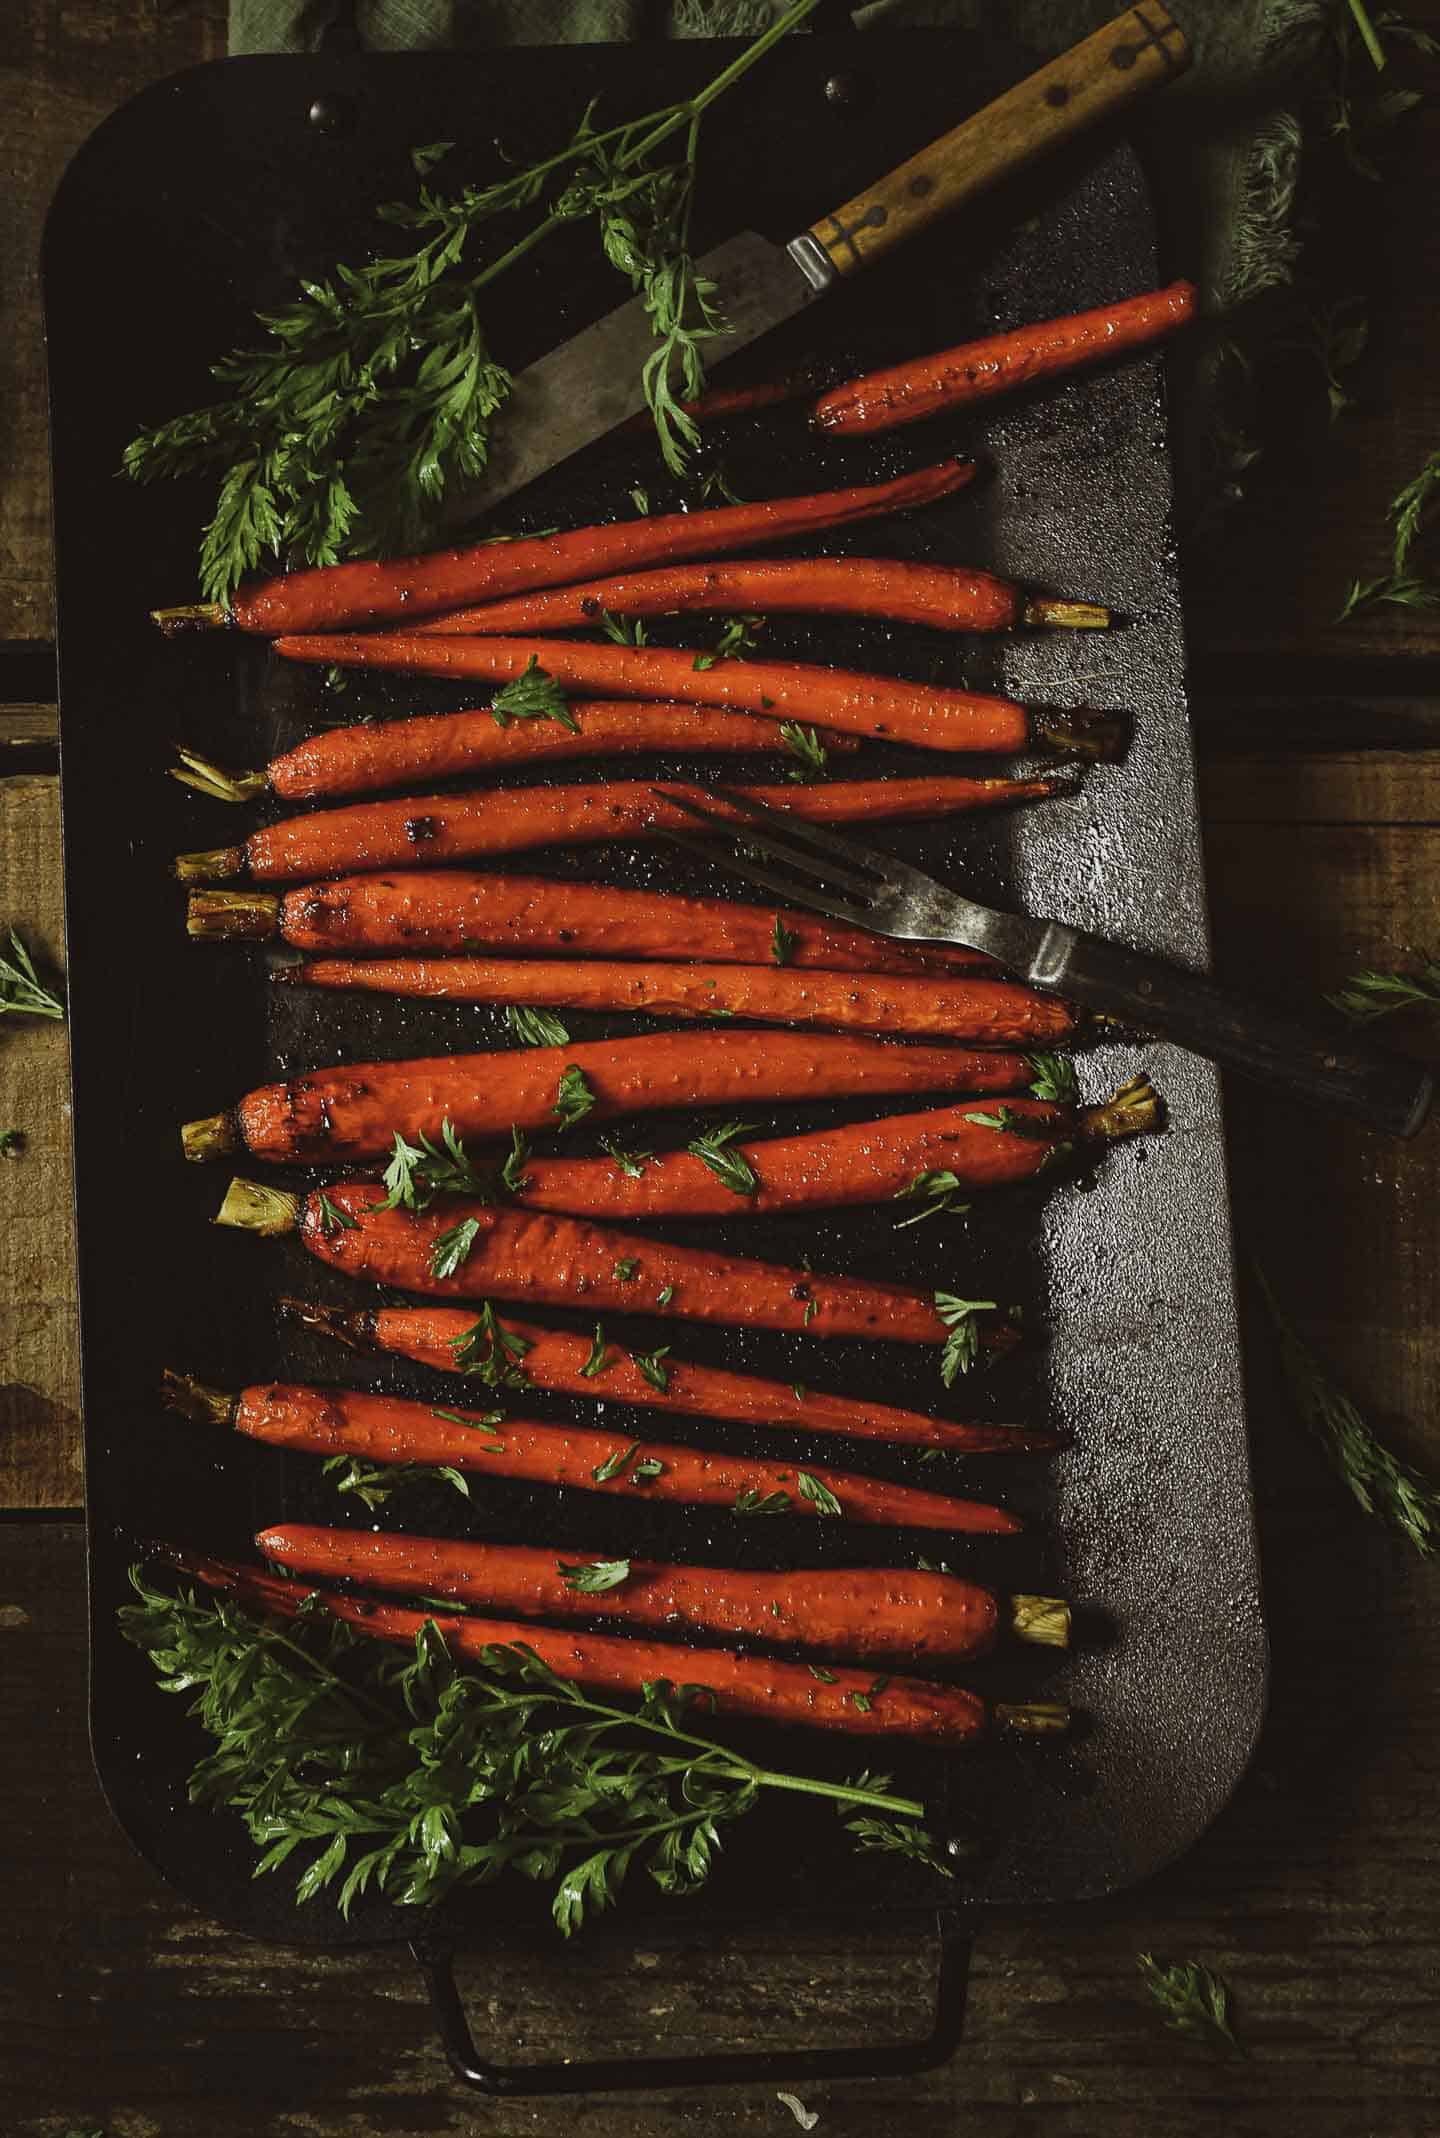 These Maple Roasted Carrots are sweet, savory, and so easy to make. All you need are 7 simple ingredients to make a delicious side dish even kids will love! Vegan, oil-free, and healthy.